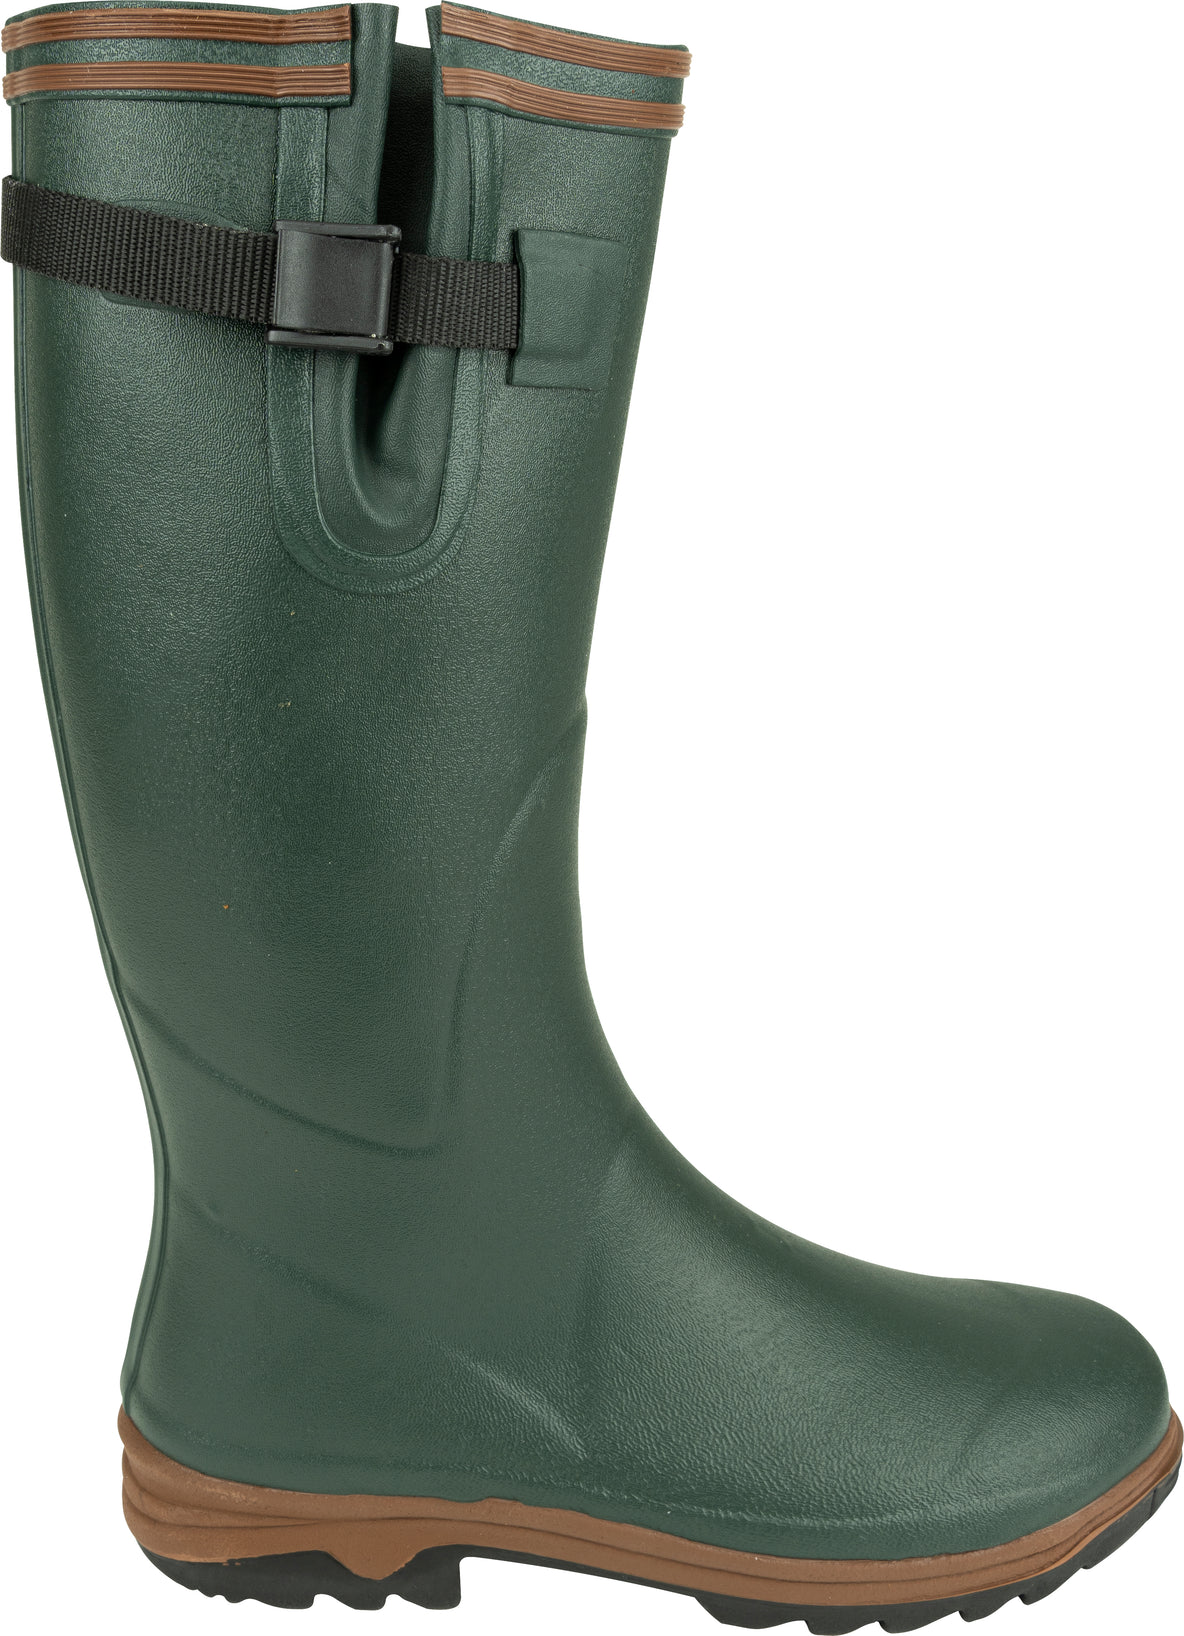 Jack Pyke Shires Wellington Boots in Green